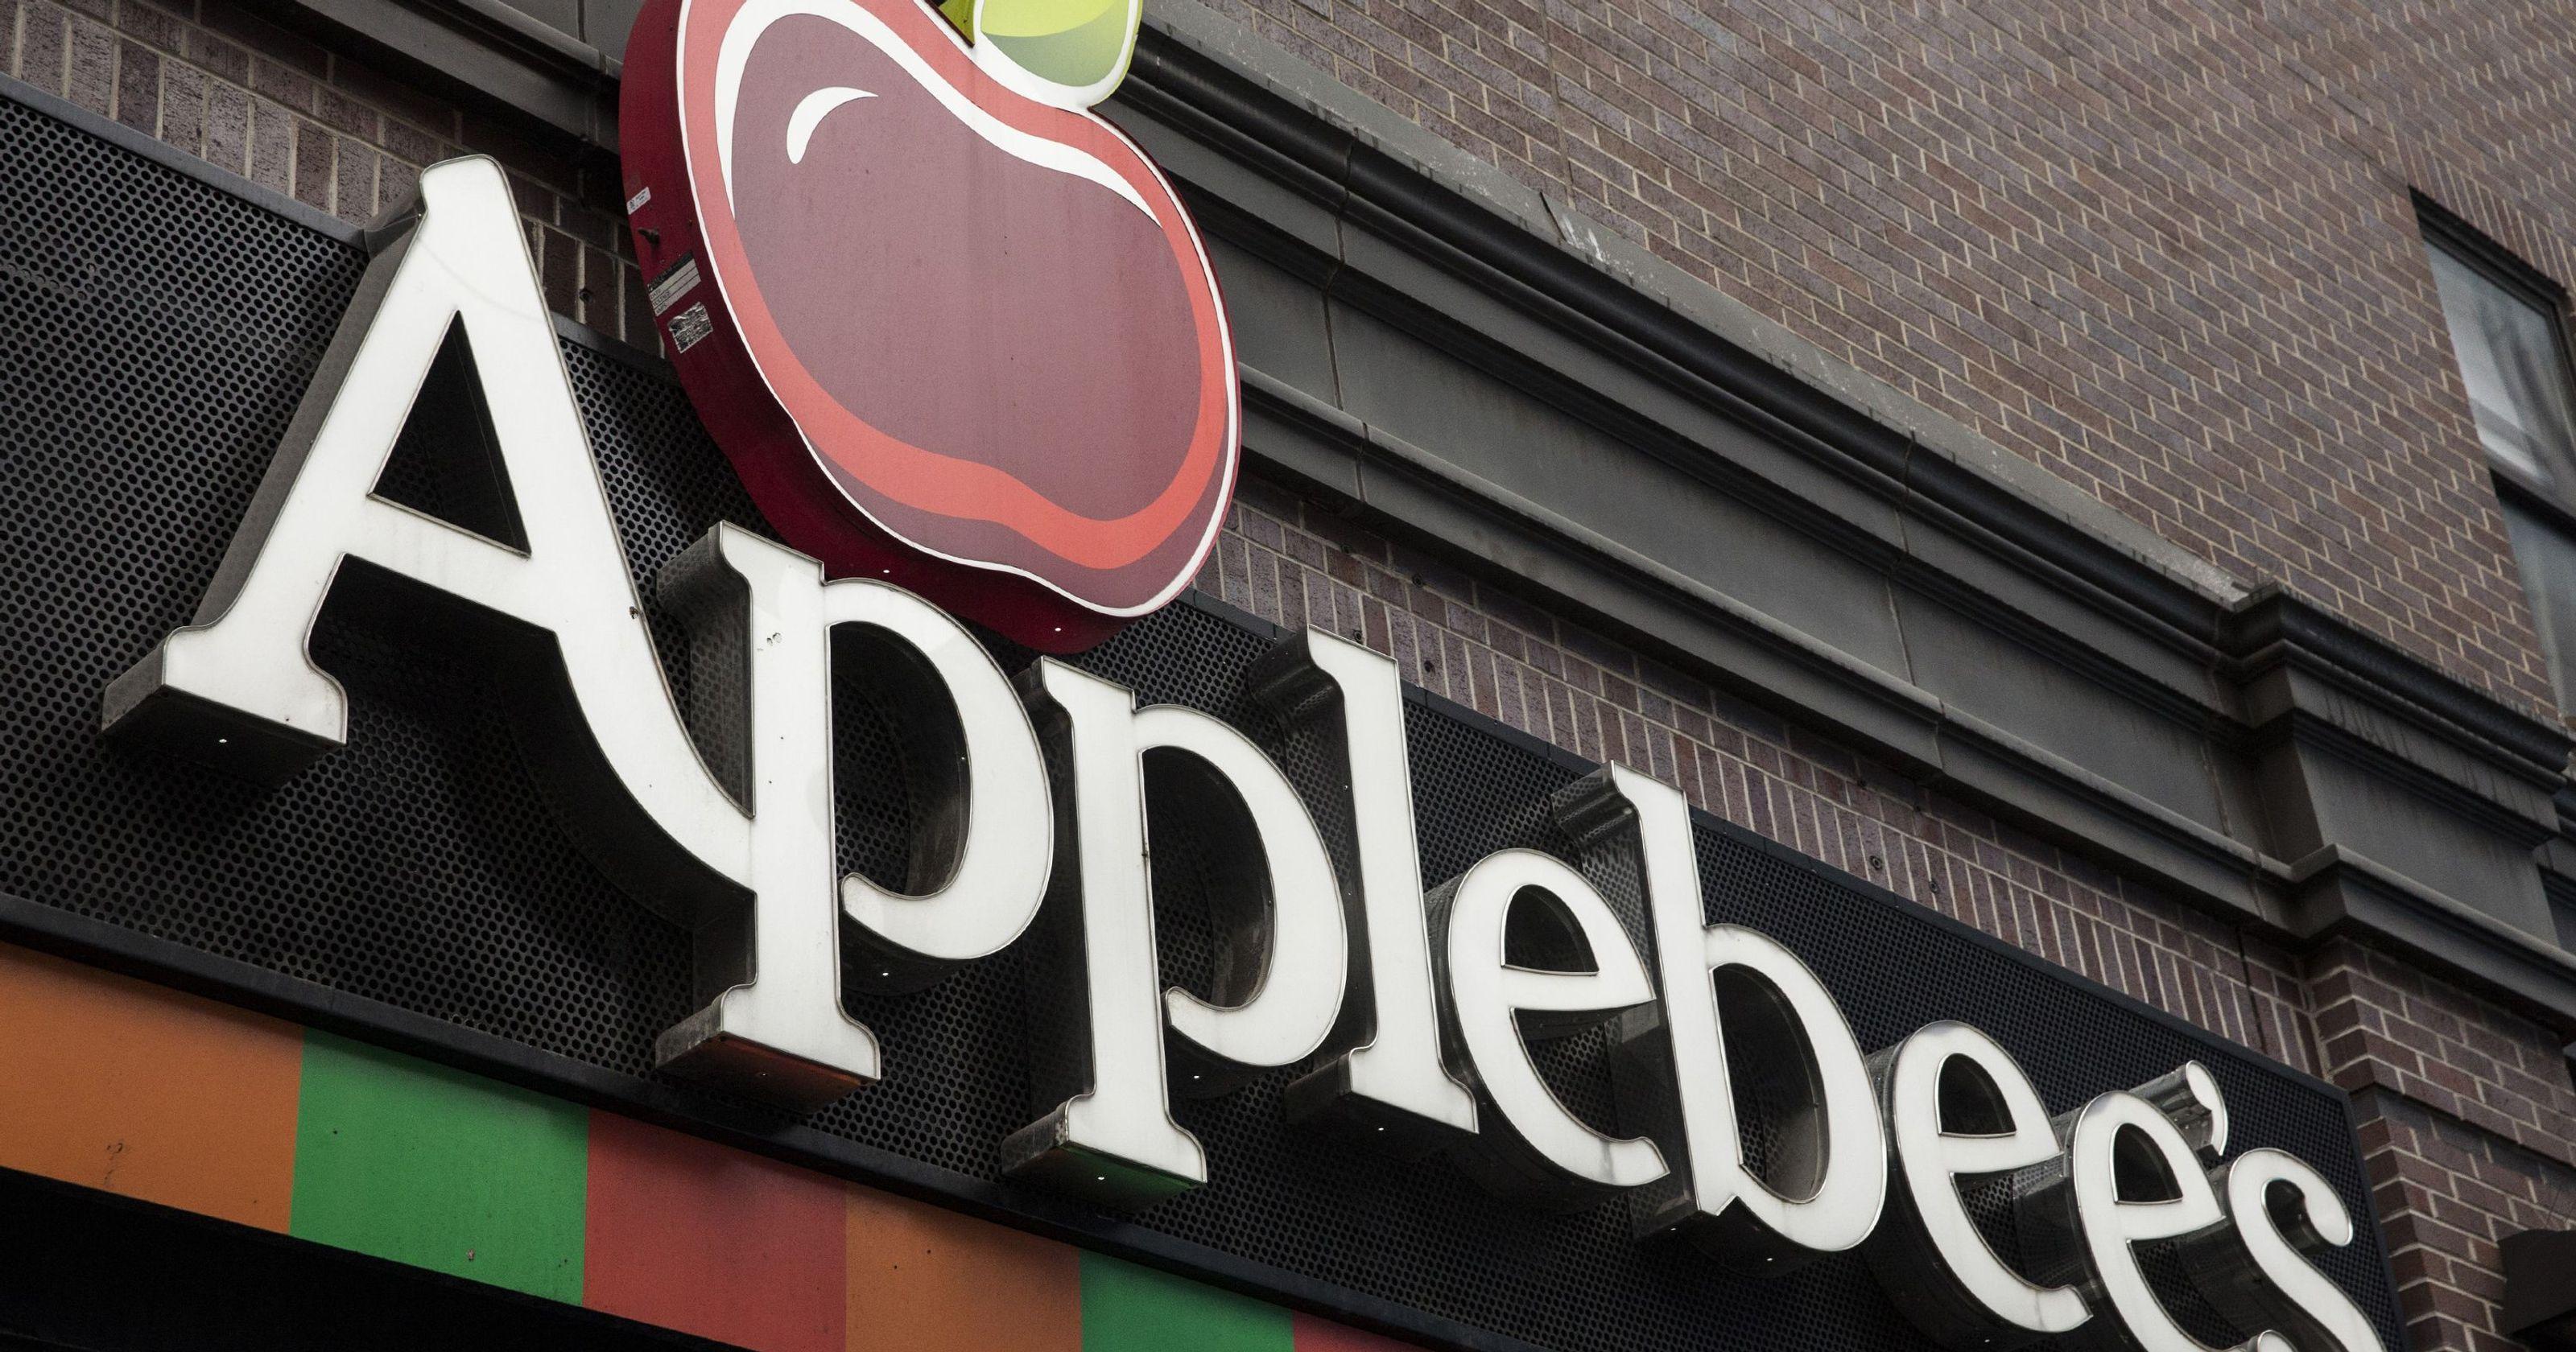 Applebee's 2013 Logo - As many as 160 Applebee's and IHOP locations to close